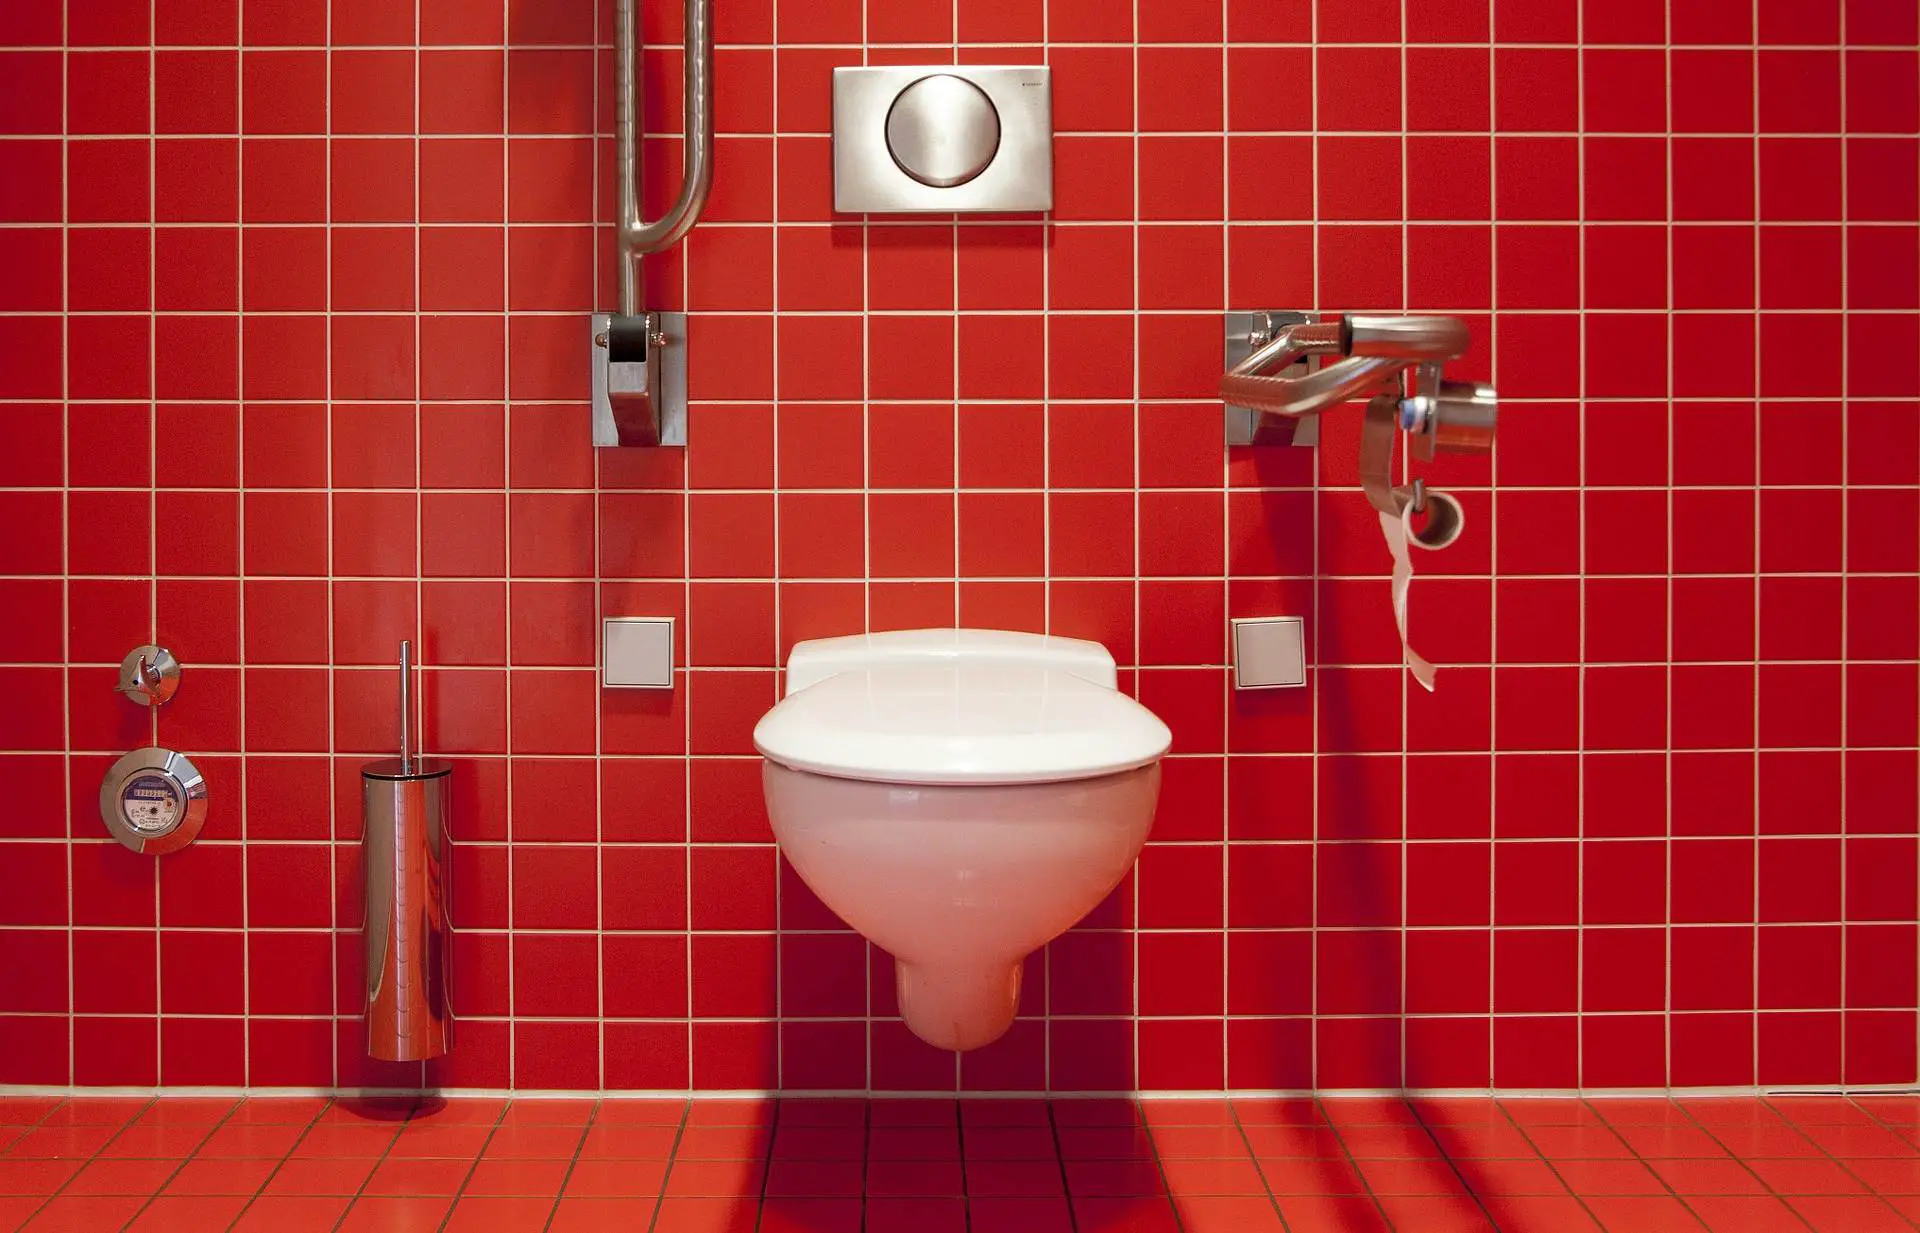 Can You Put Drano Down The Toilet How To Unclog A Toilet With Poop In It 5 Proven Methods